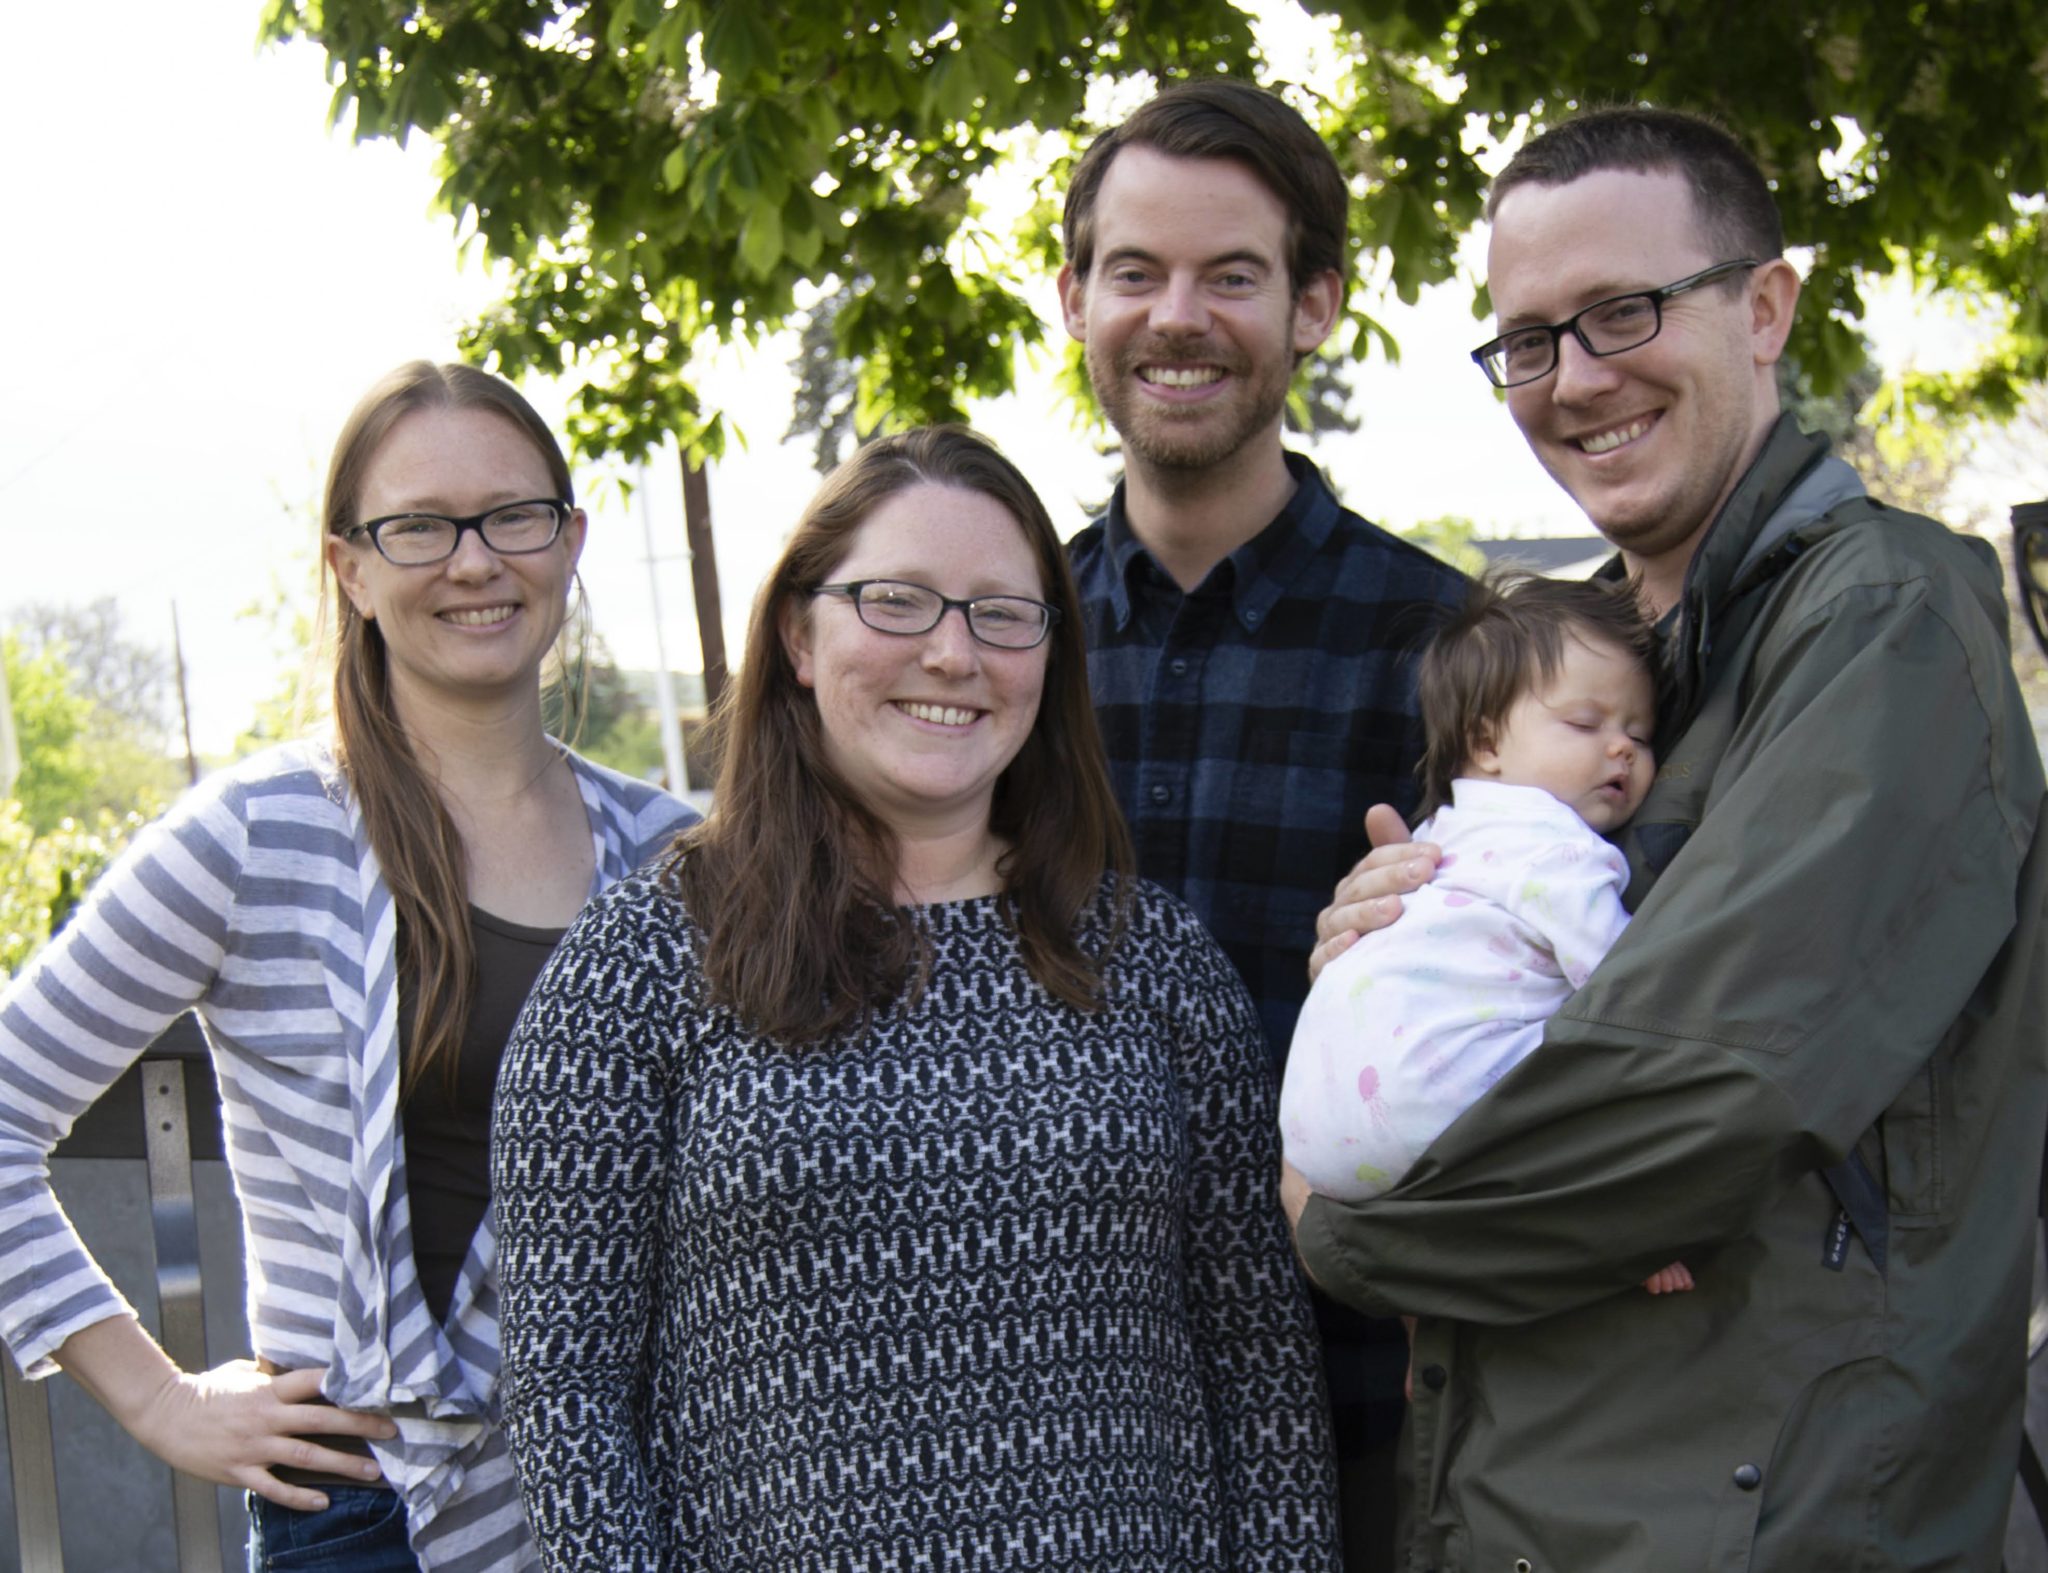 Amanda Hoey, Carrie Pipinich, Jeremiah Paulsen and Matthew Klebes (with baby) photo